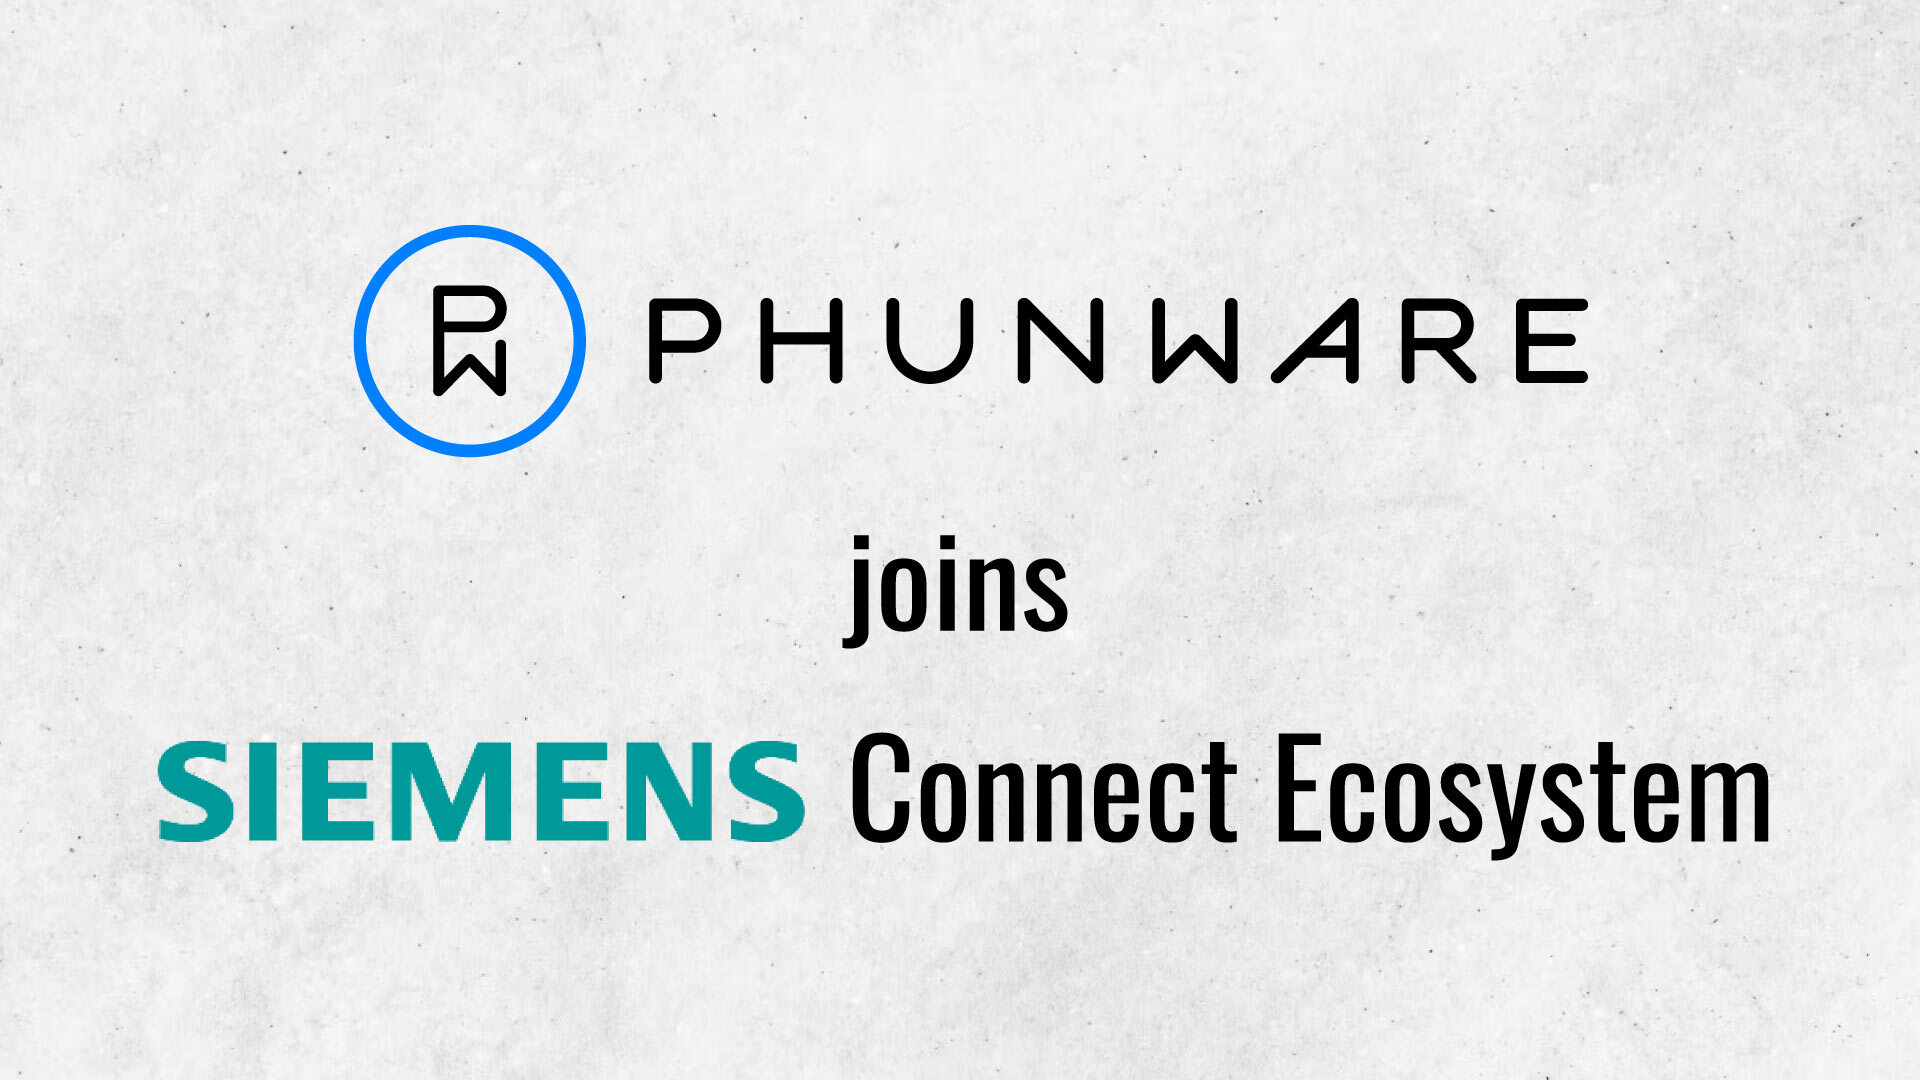 Phunware joins Siemens Connect Ecosystem